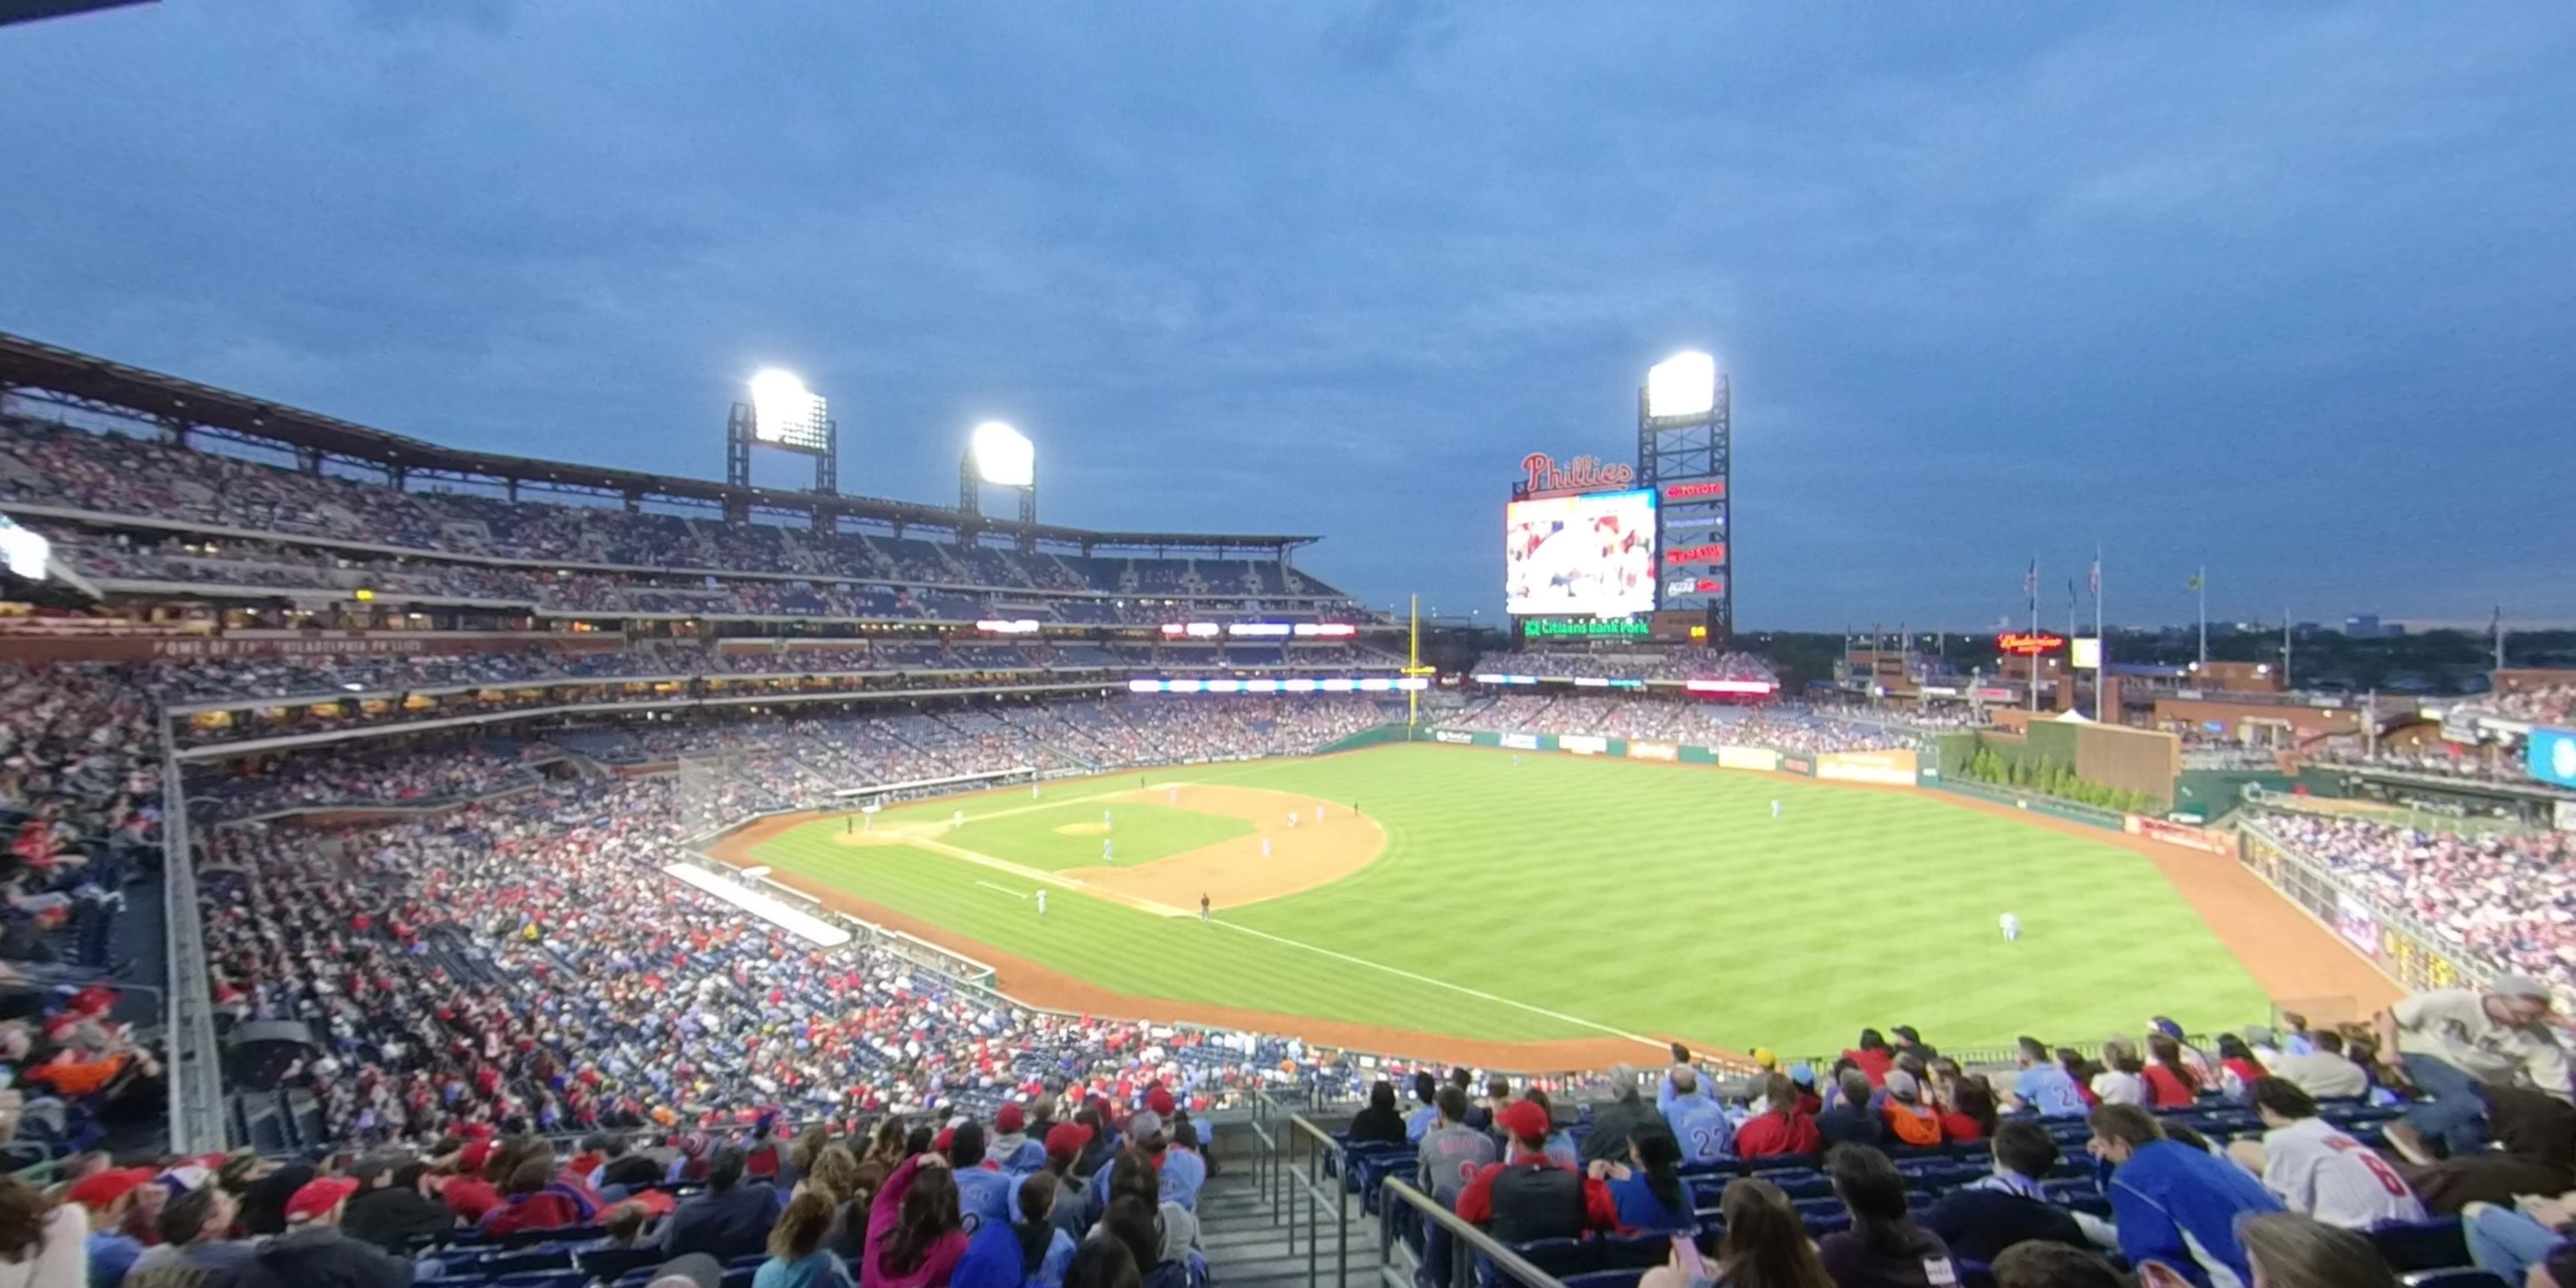 section 209 panoramic seat view  for baseball - citizens bank park